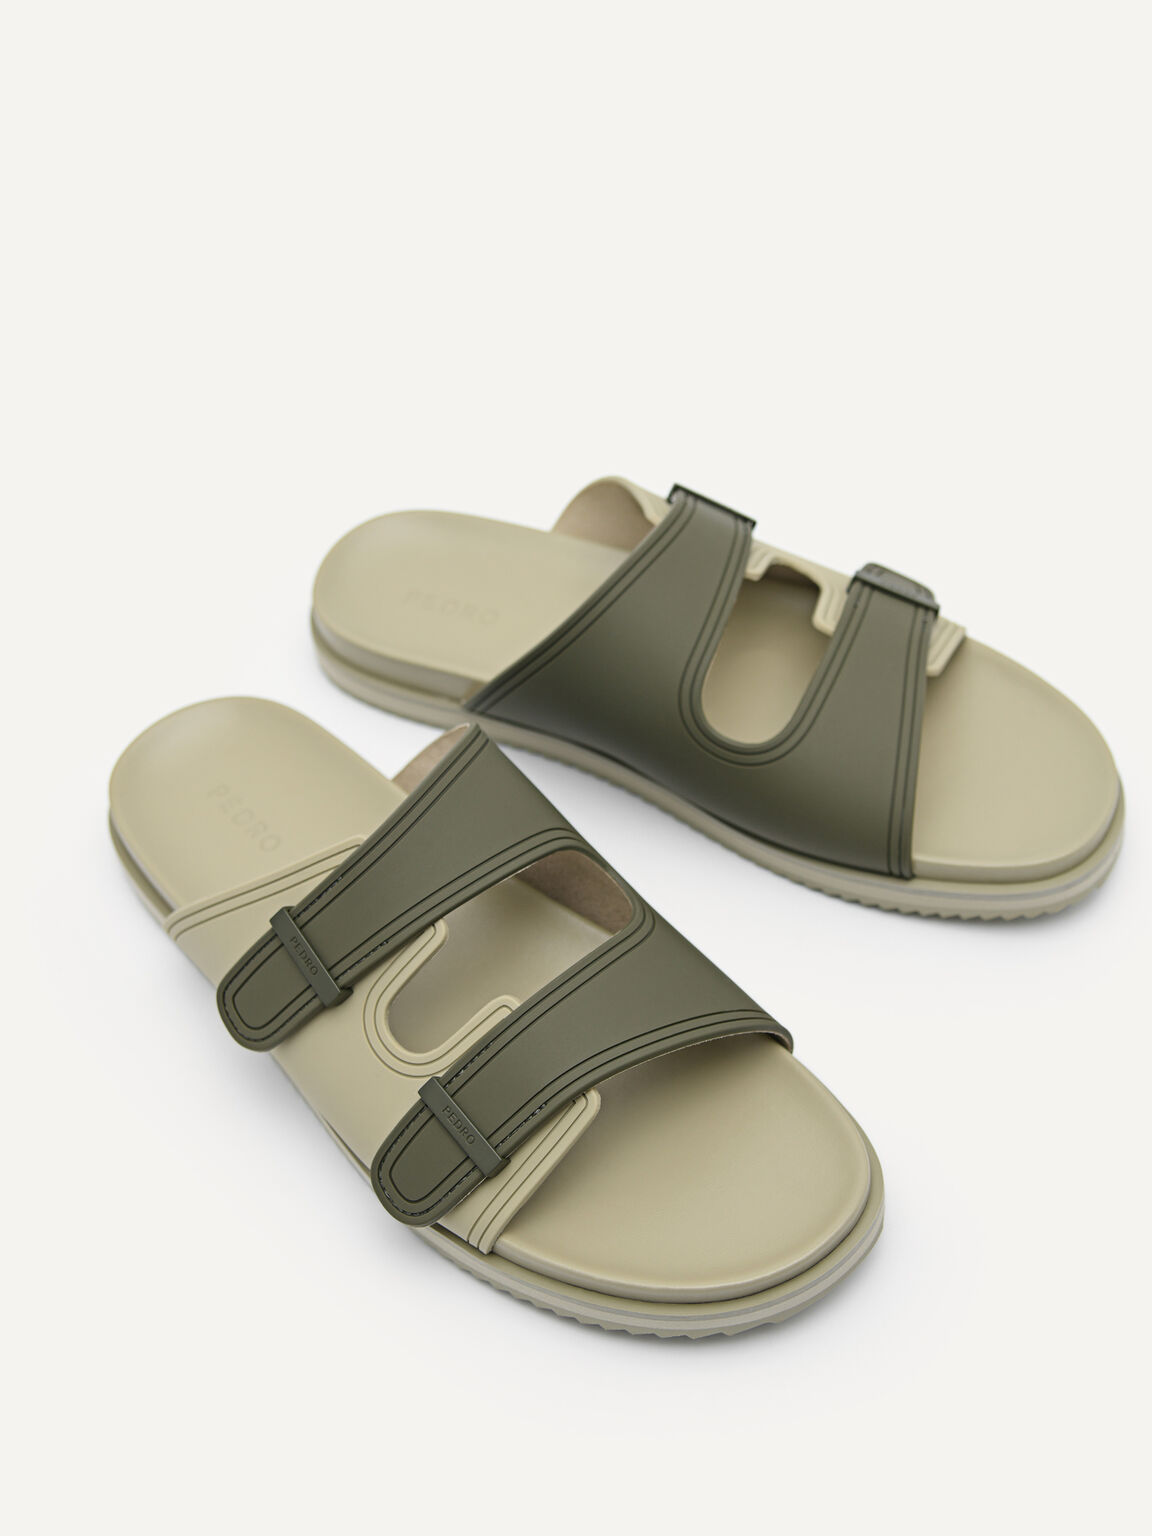 Rubber Double-strap Walking Sandals, Military Green, hi-res